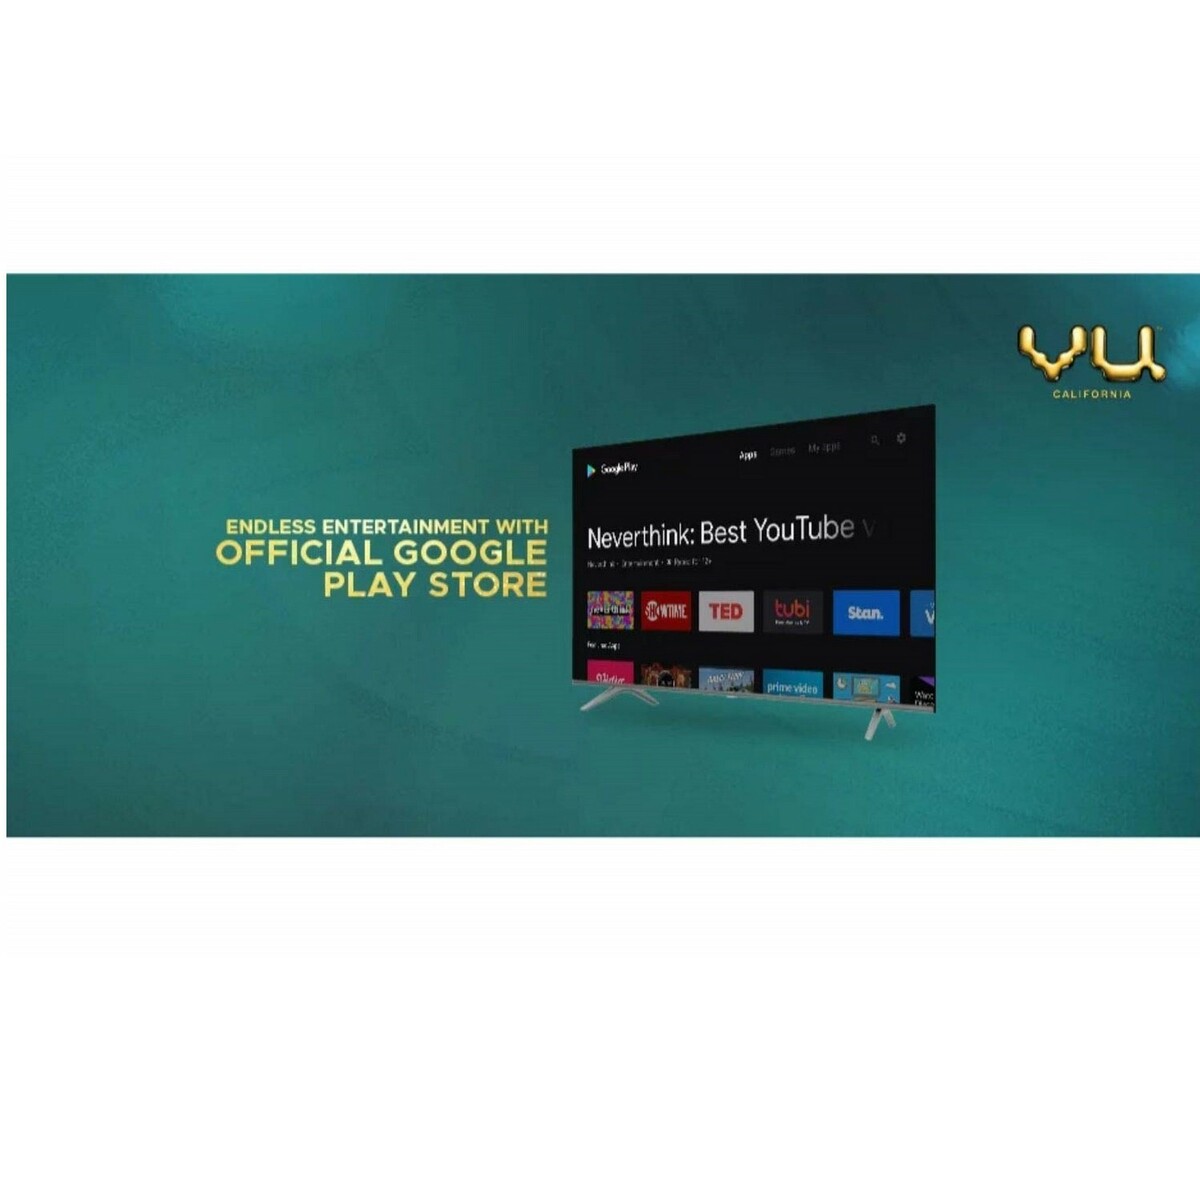 VU 4K Ultra HD LED Smart TV Android 9 Pie 43PM 43"(1Year Warranty)